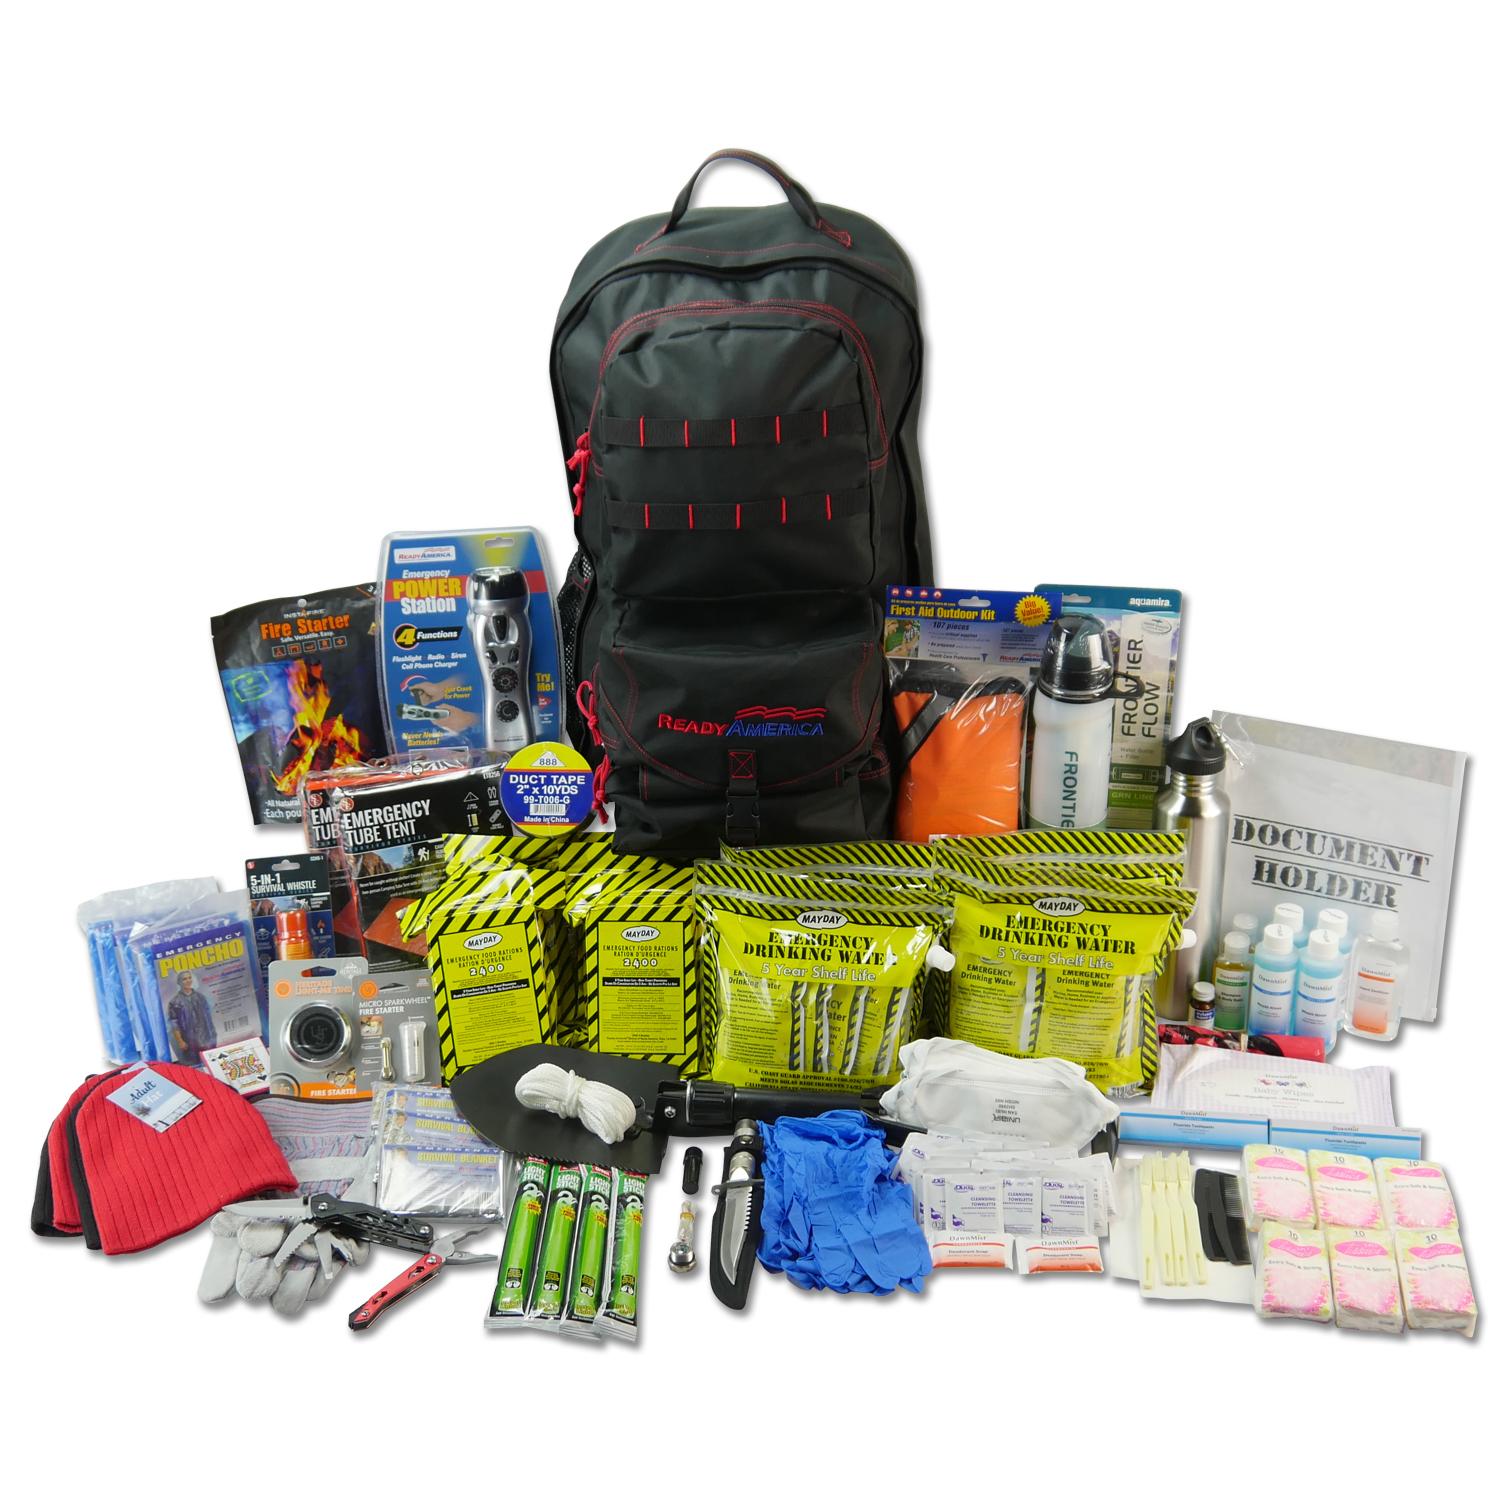 Ready America 72 Hour Deluxe Emergency Kit, 4-Person 3-Day